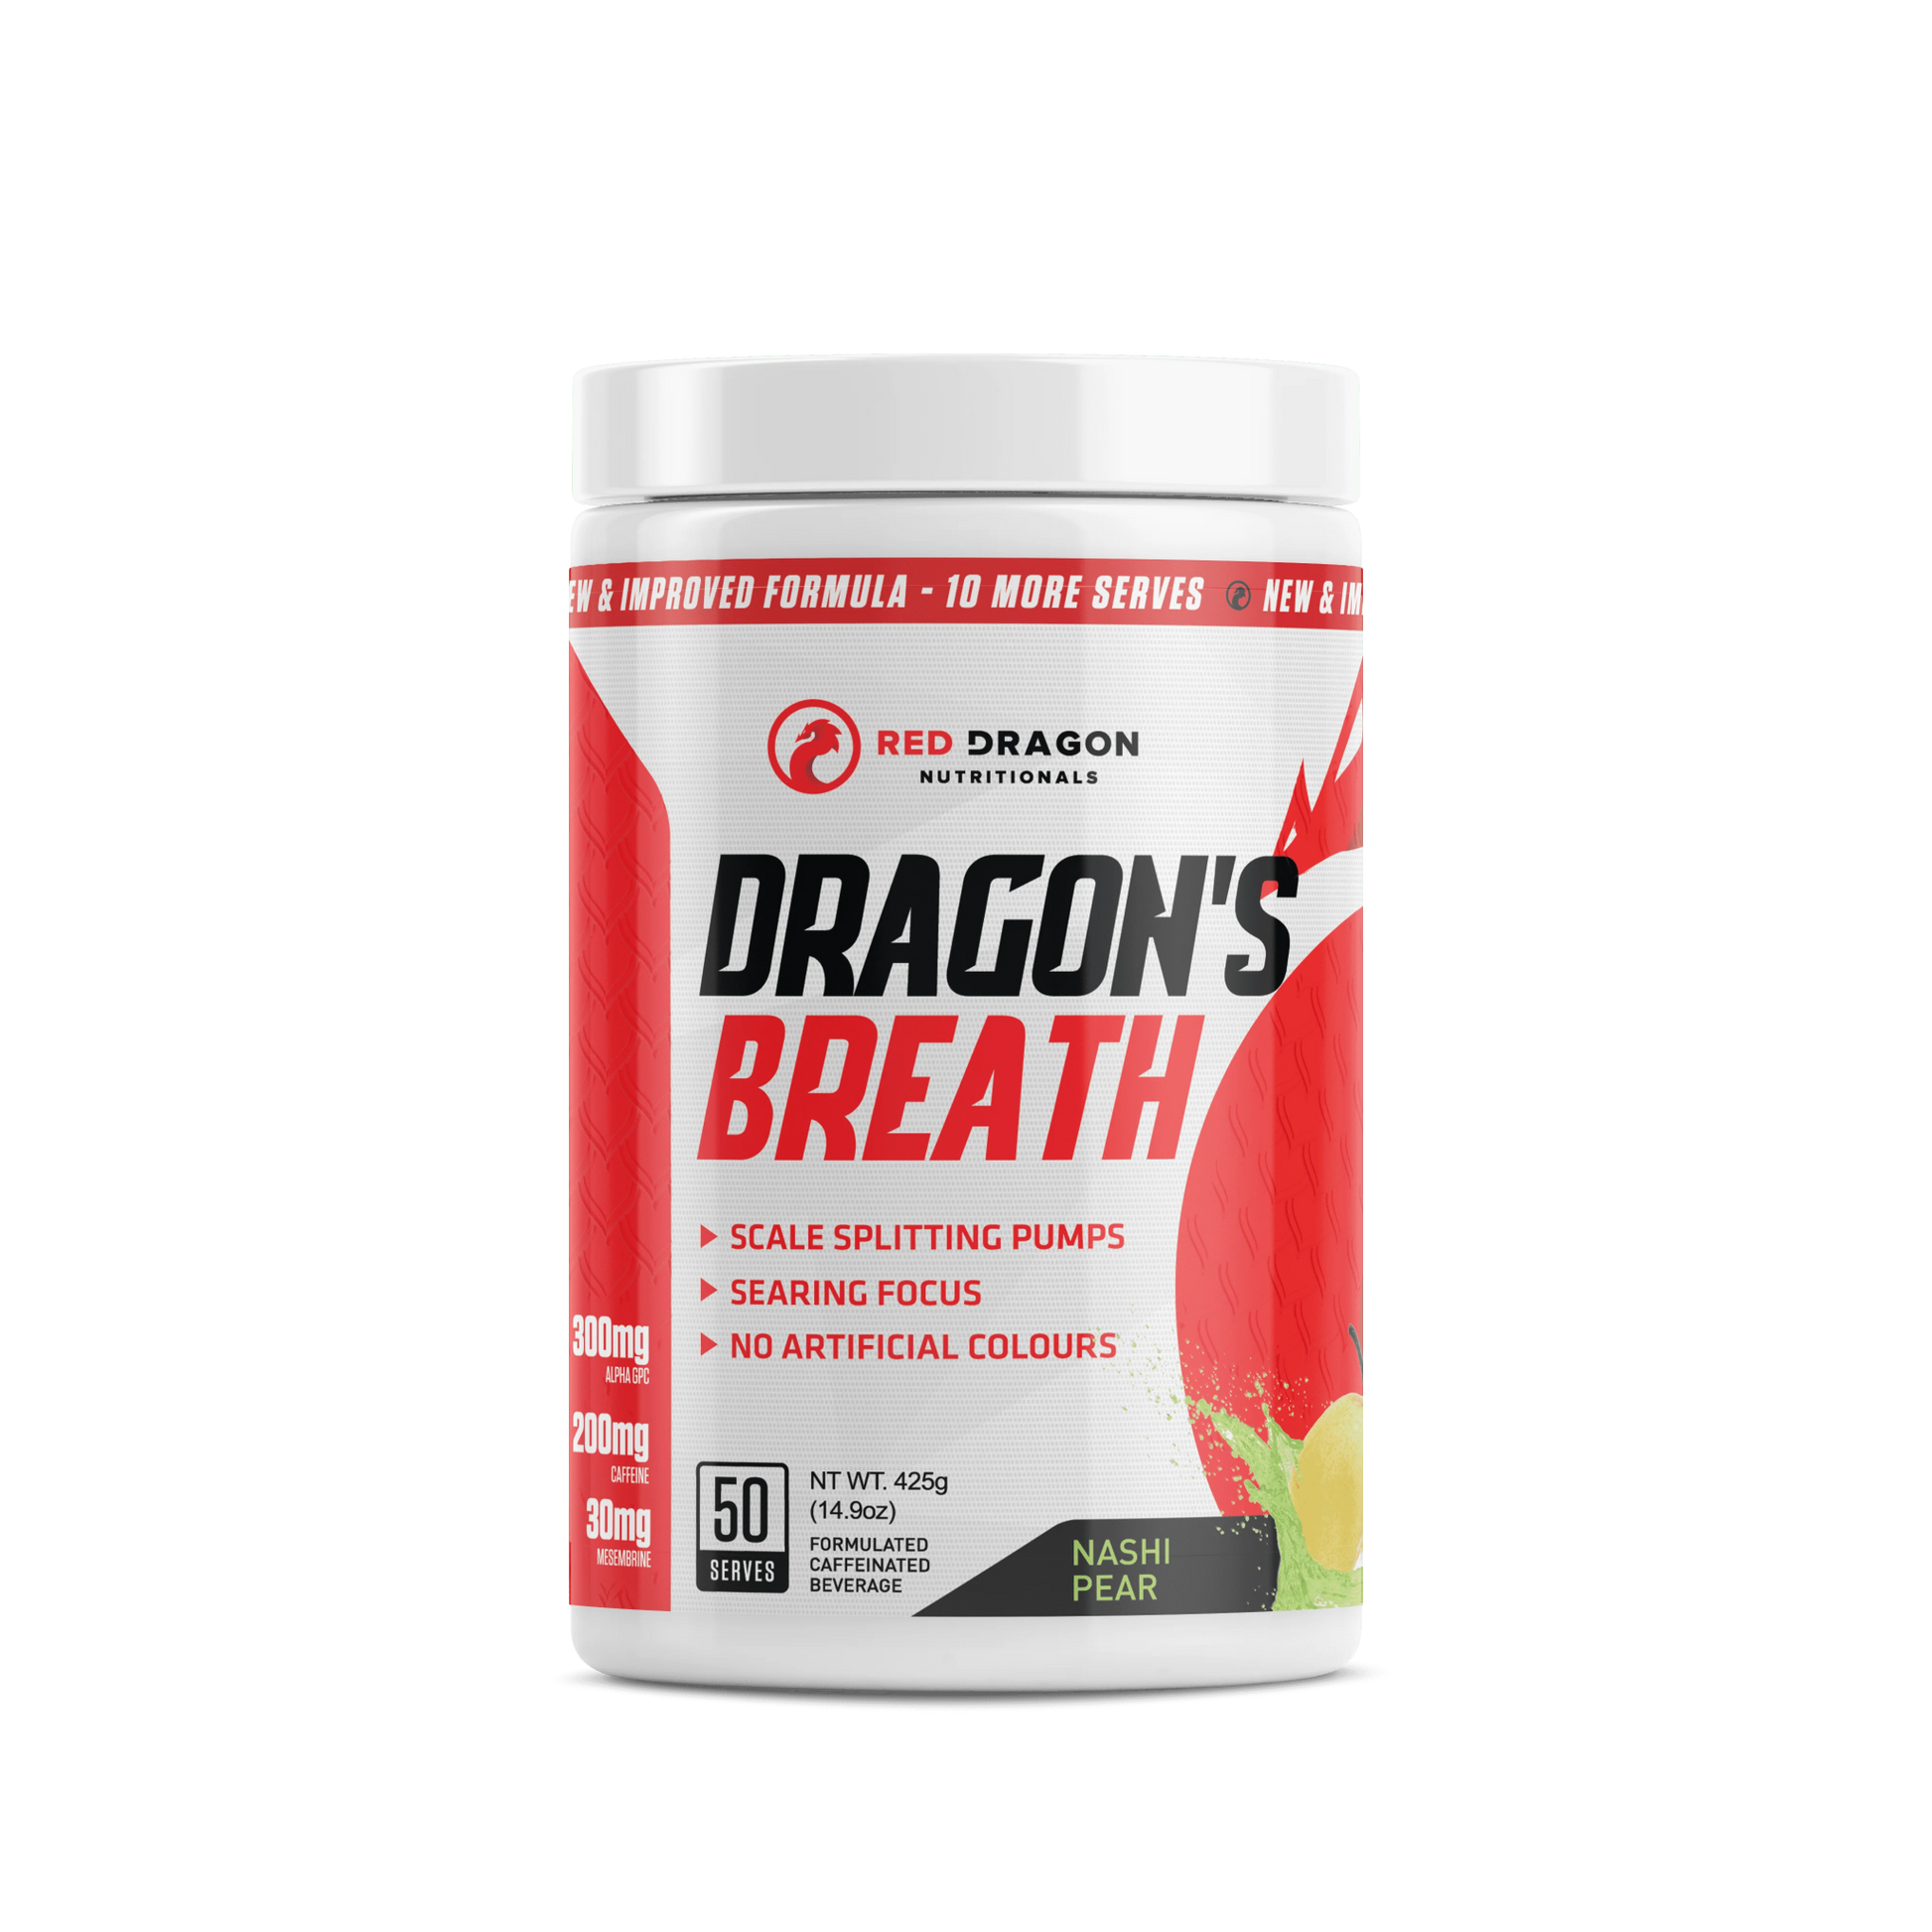 Red Dragon Nutritionals - Dragon's Breath Pre-Workout - Supplements - 50 Serves - The Cave Gym